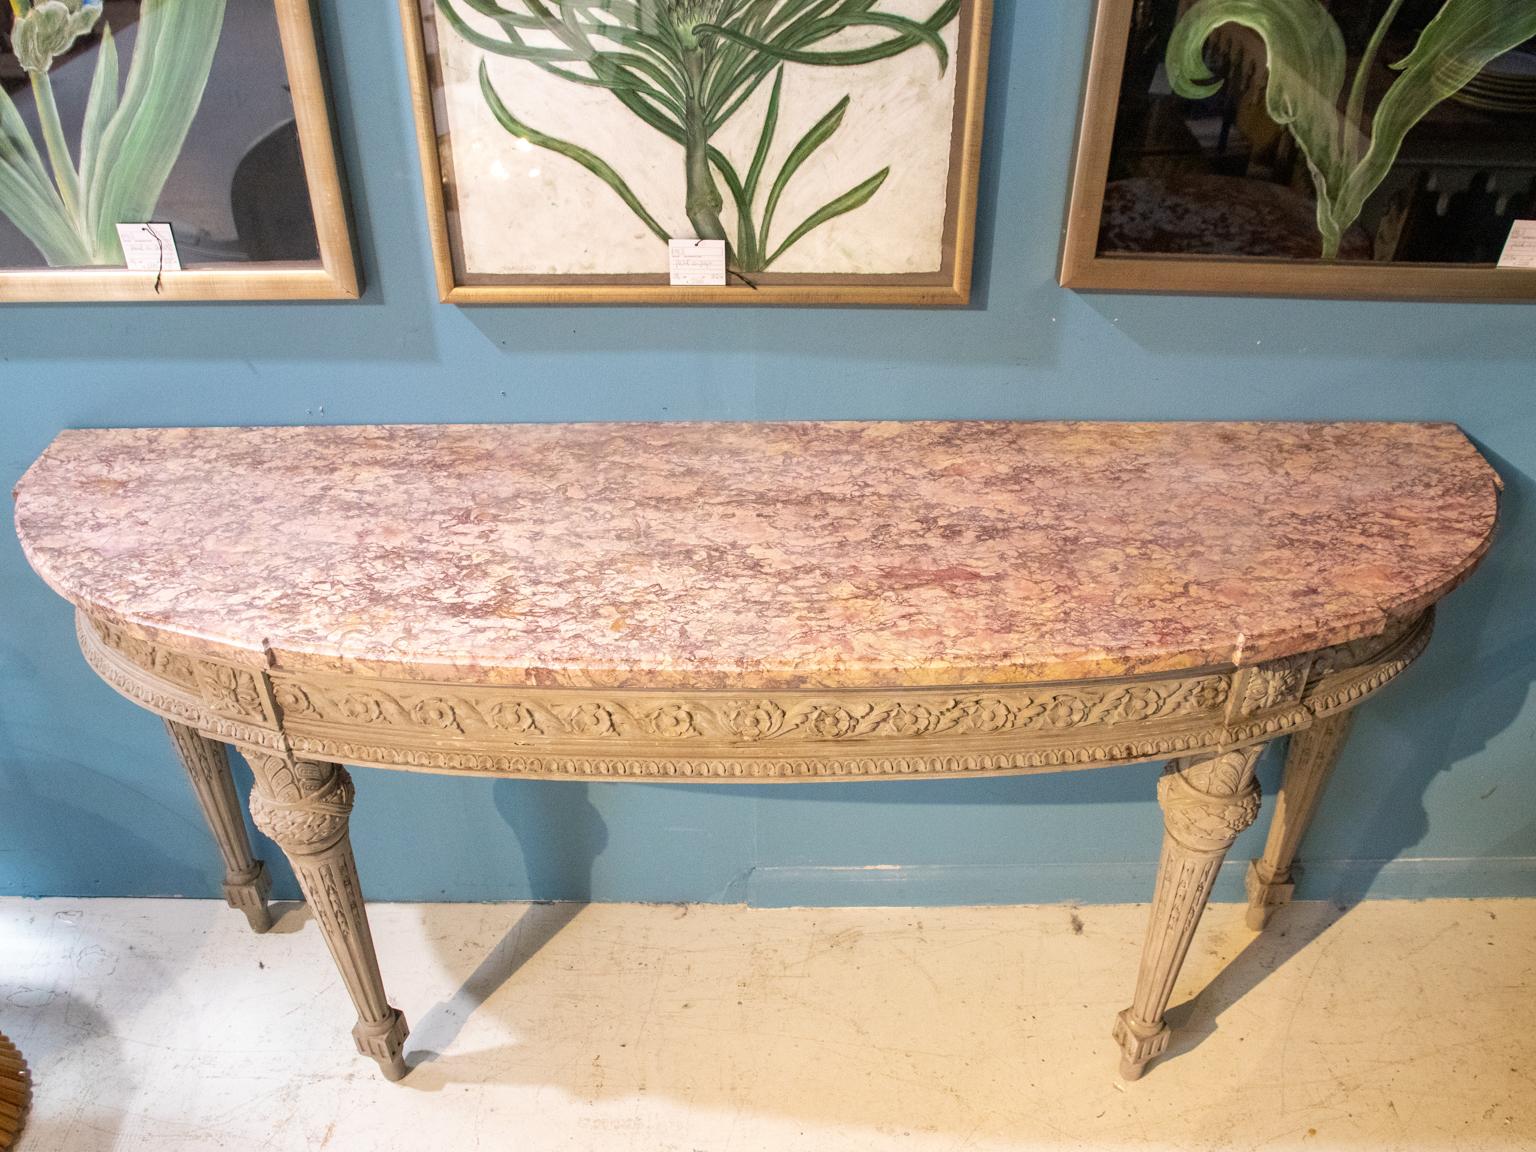 Neoclassical grey painted console with marble top, circa 1920s. The piece is detailed neoclassical motifs such as carved floral guilloche trim on the skirt and laurel wreaths on the turned legs. Please note of wear consistent with age including